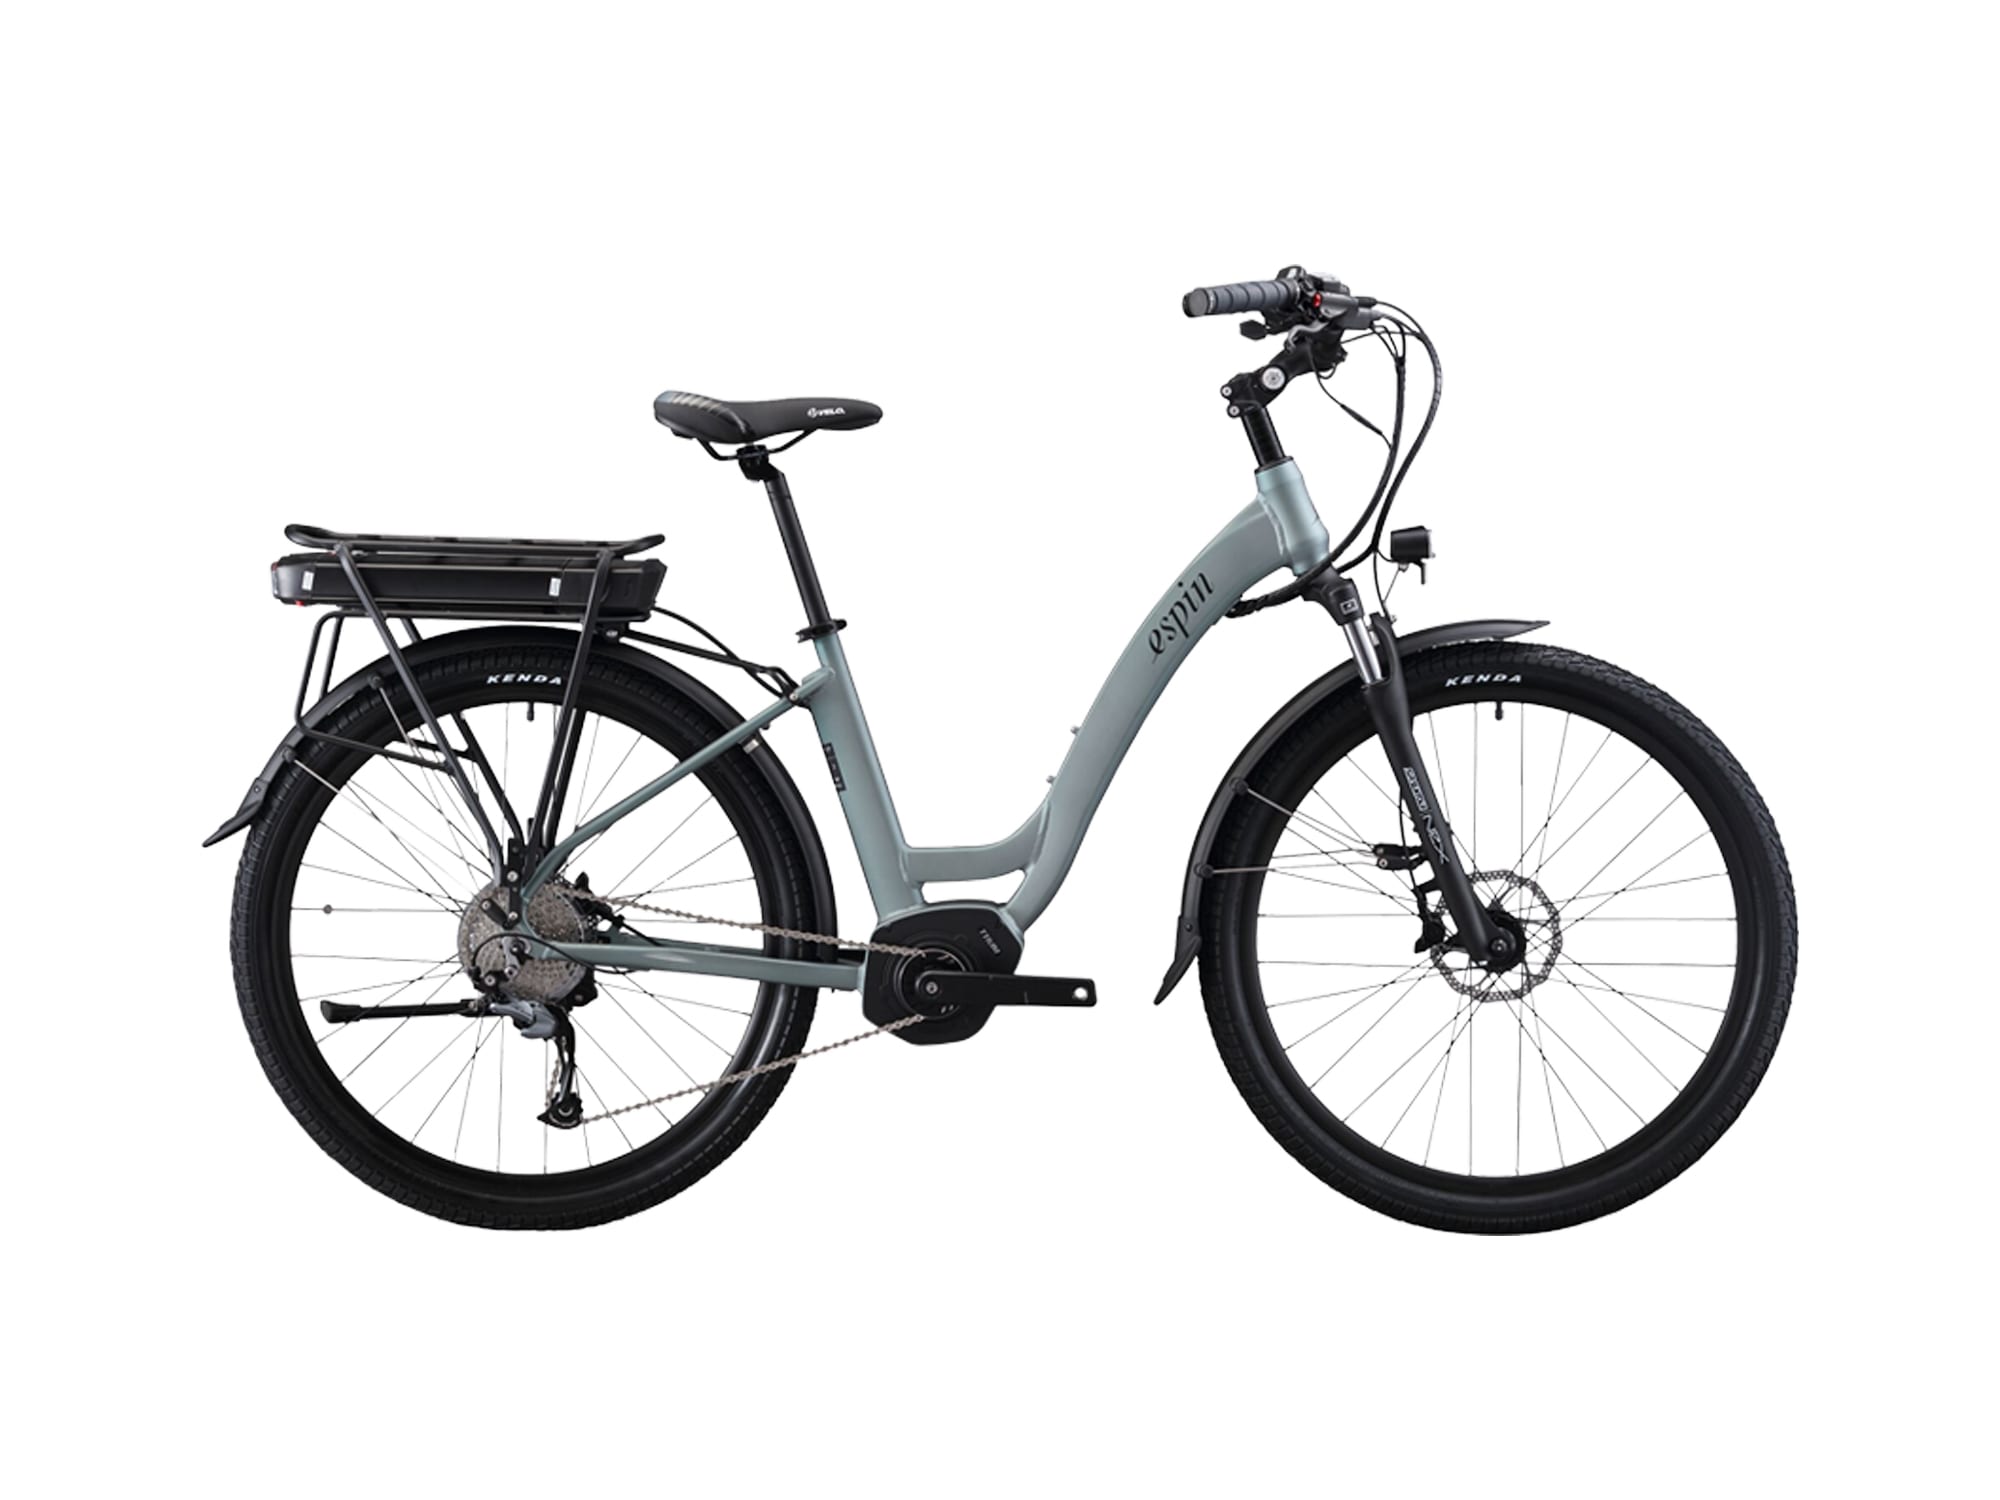 Review | ElectricBikeReview.com